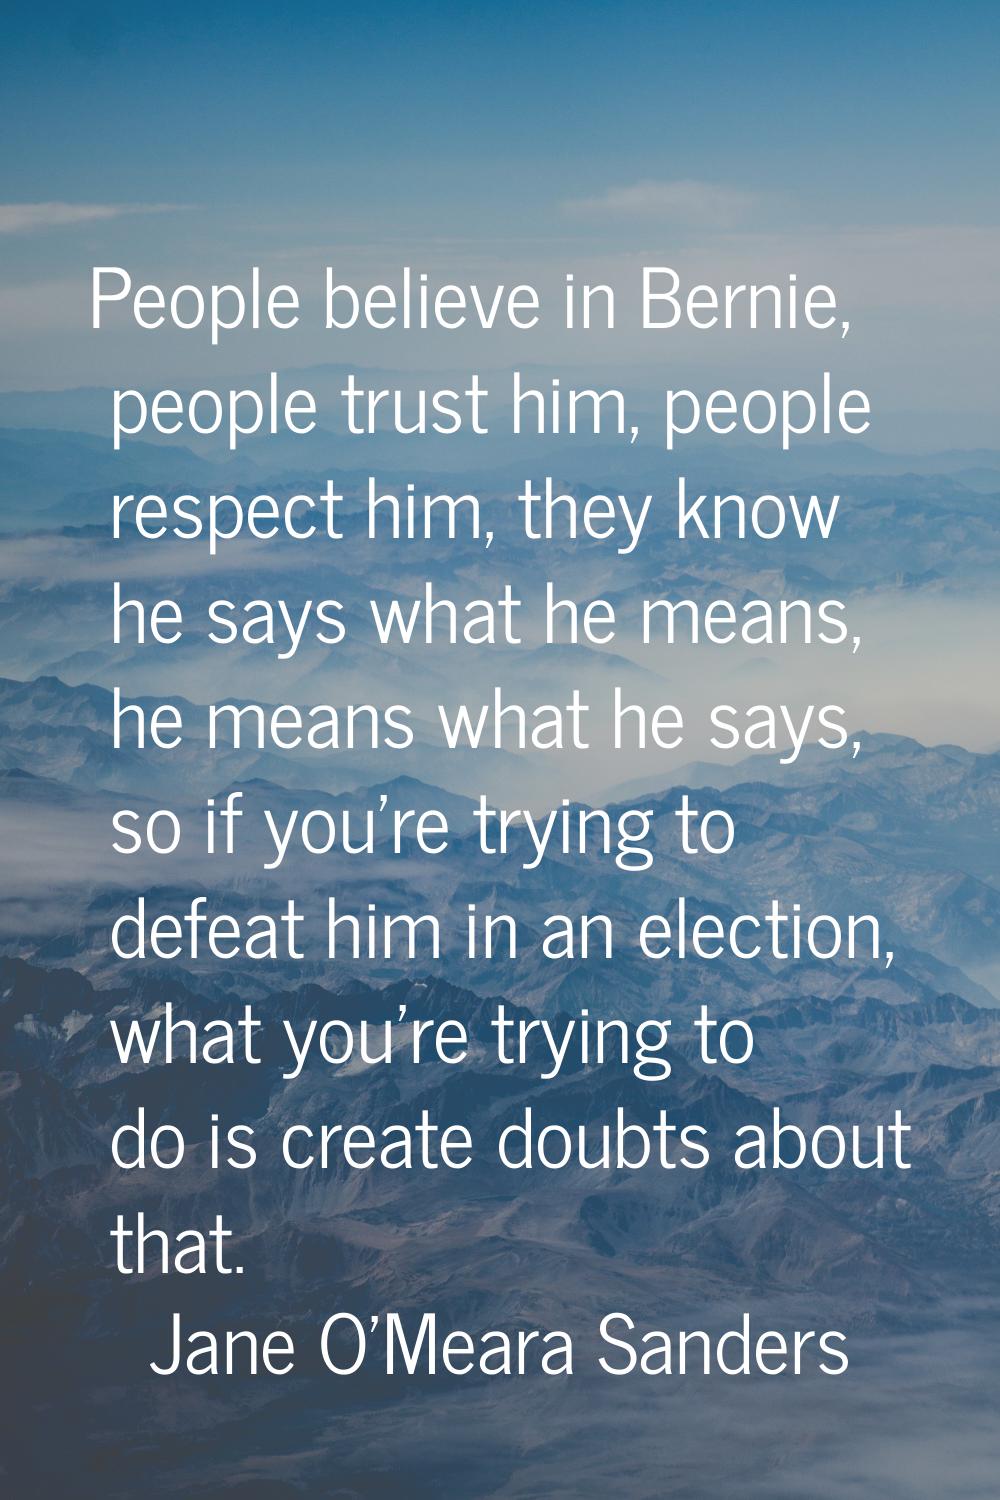 People believe in Bernie, people trust him, people respect him, they know he says what he means, he